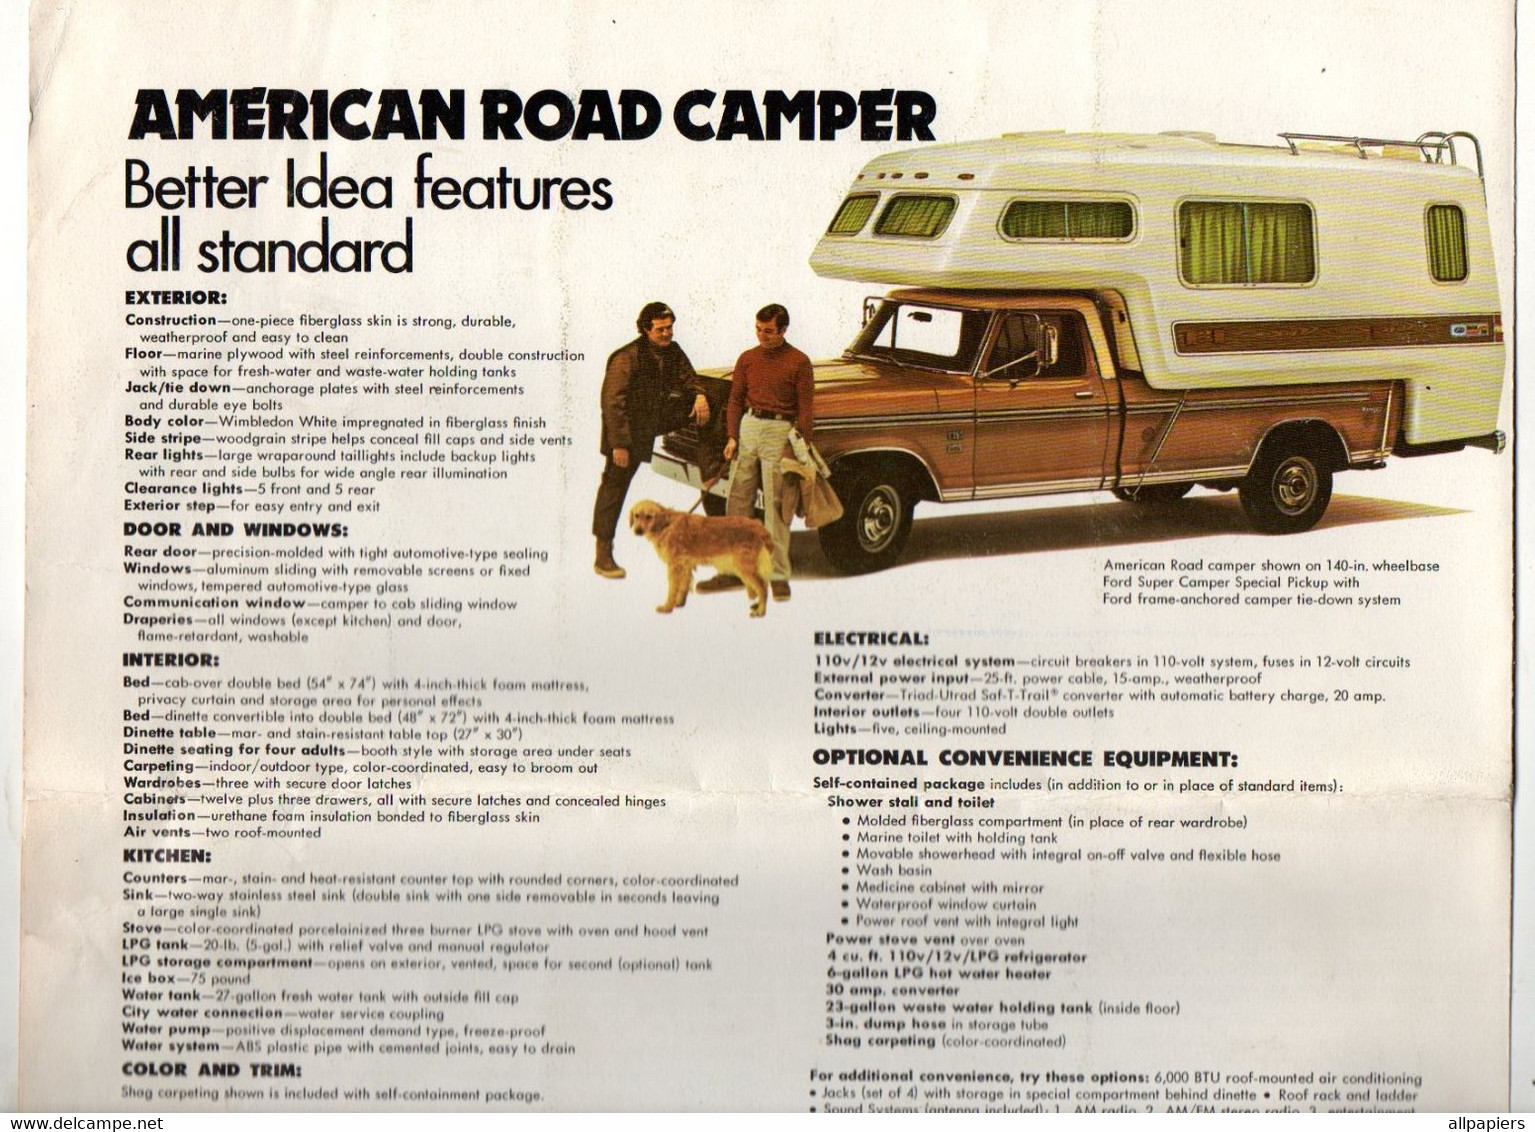 Dépliant Publicitaire Ford's American Road Camper The New Generation Camper Body From Ford De 1973 - Format : 30.5x28 Cm - Stati Uniti